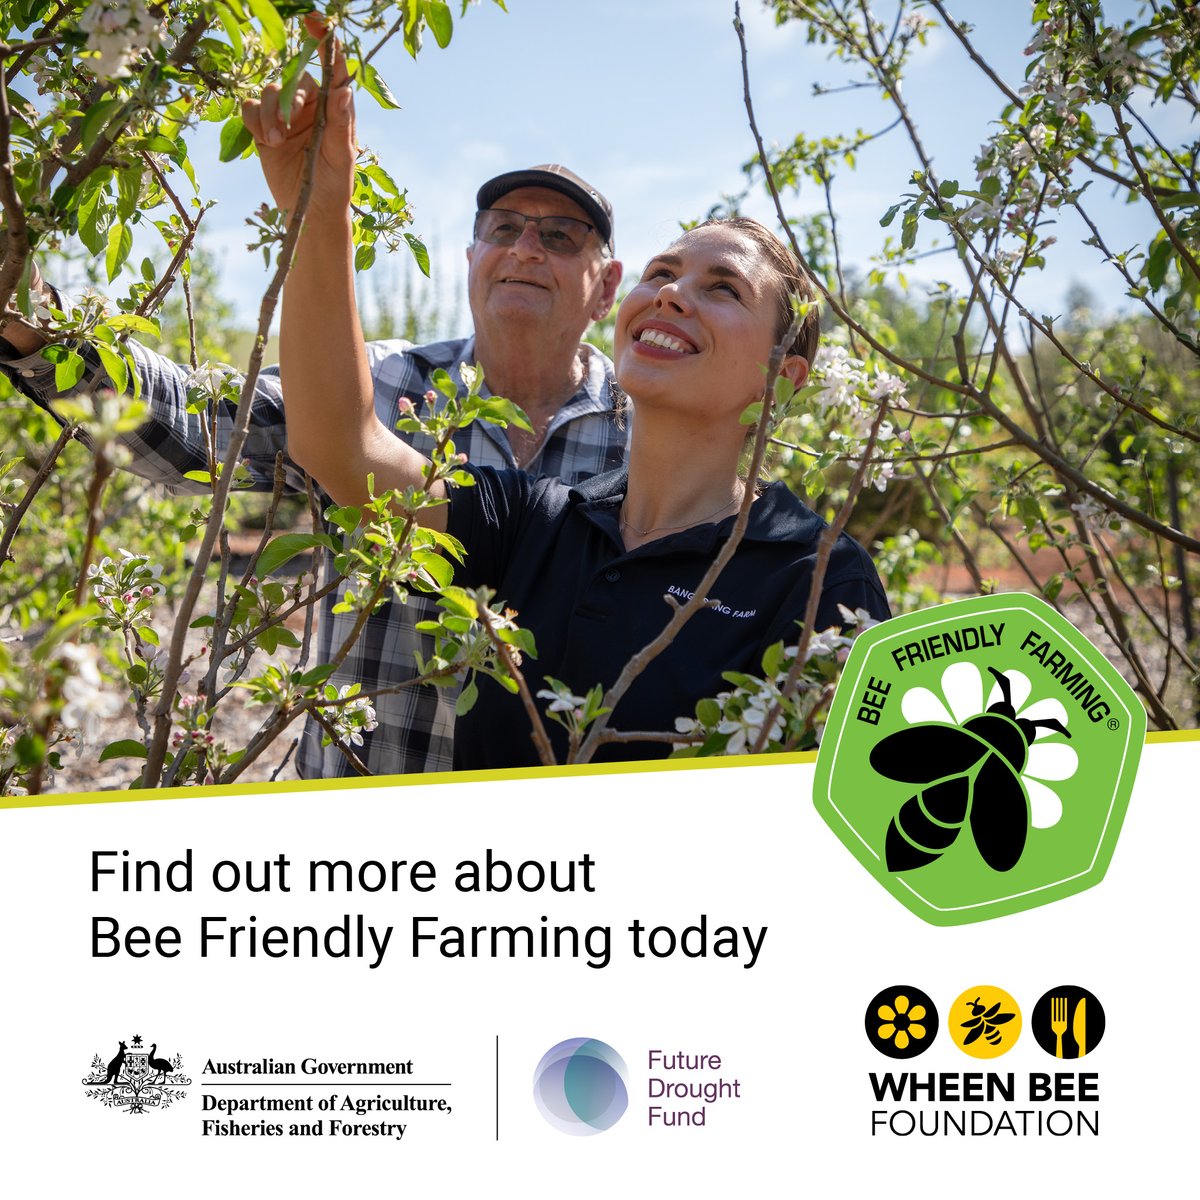 Become a Bee Friendly Farmer today and increase farm efficiency, improve biodiversity and show a commitment to sustainability to customers, consumers and communities. Learn more at beefriendlyfarming.org.au #beefriendlyfarming #agribusiness